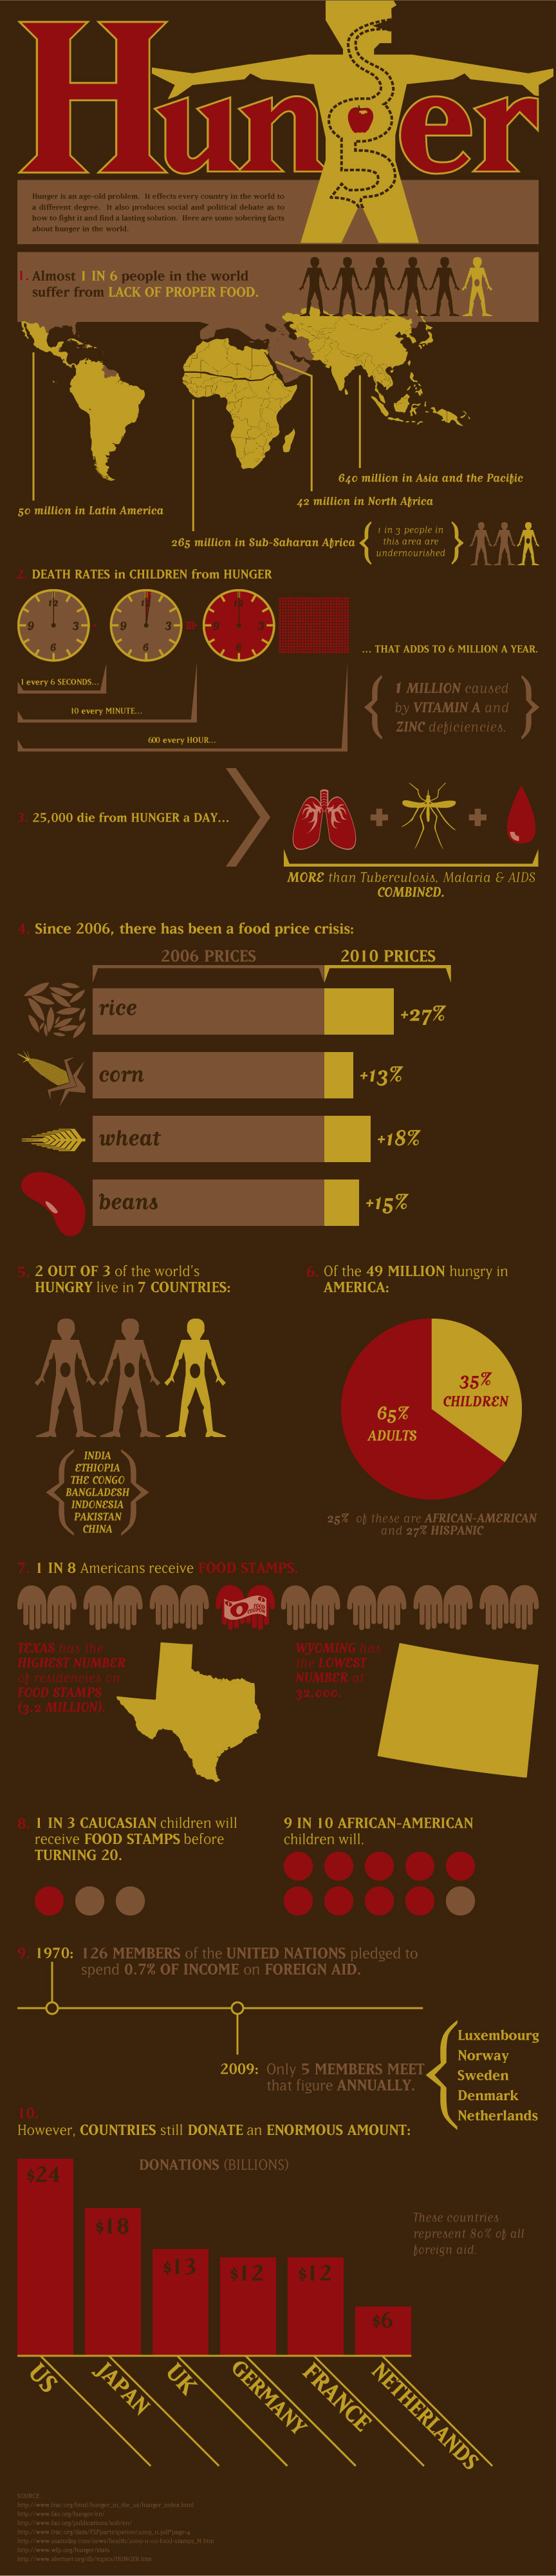 Hunger Infographic